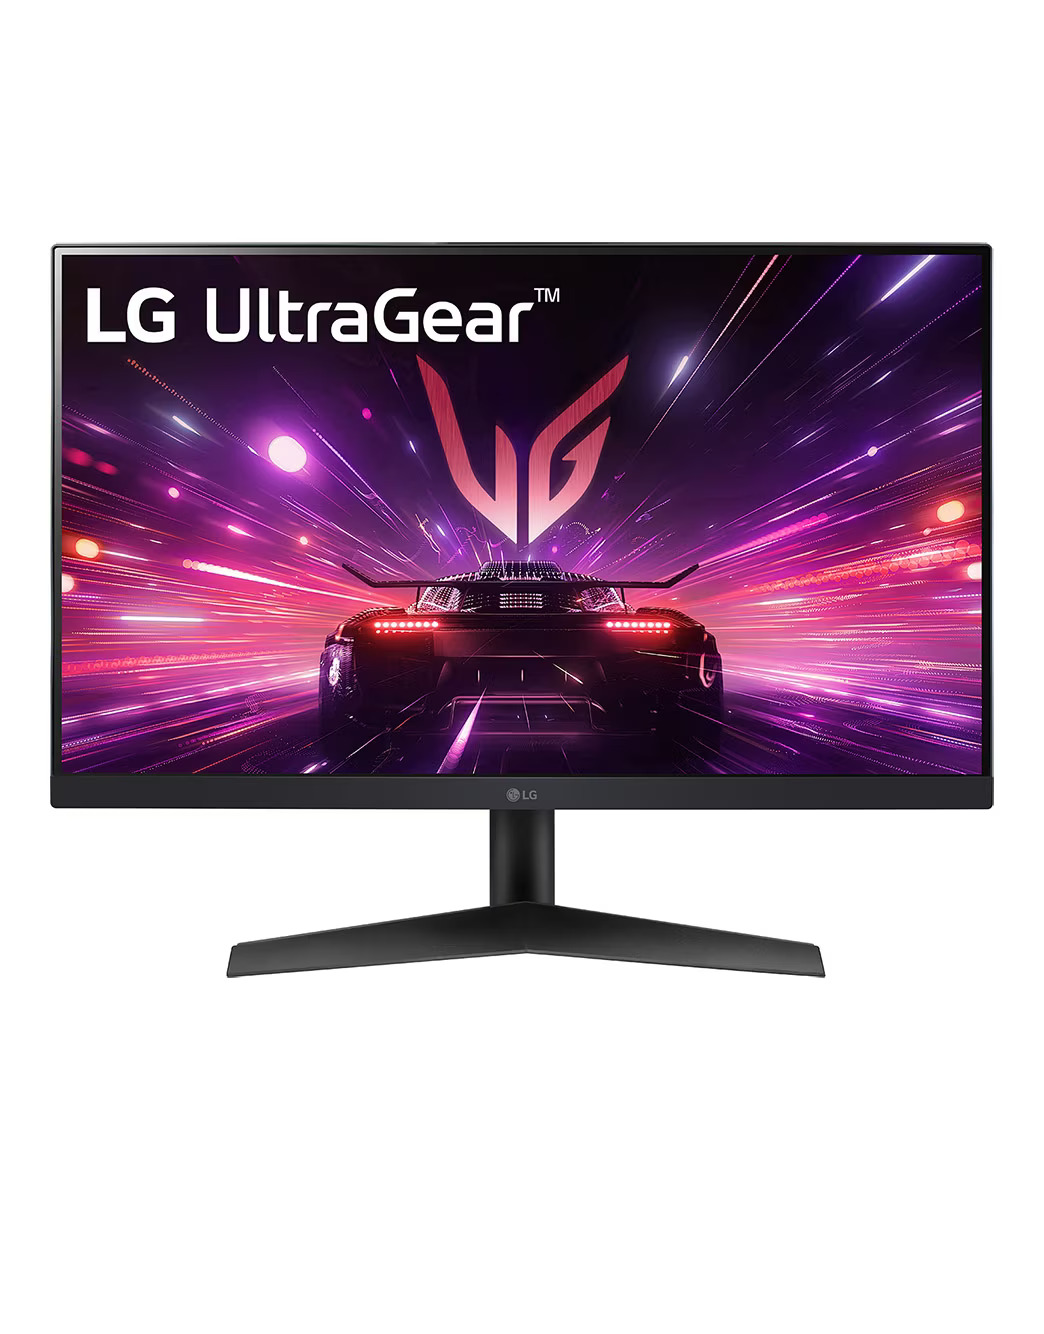 LG 23.8" 24GS60F FHD IPS 1ms 180Hz NVIDIA G-SYNC™ COMPATIBLE UltraGear Monitor